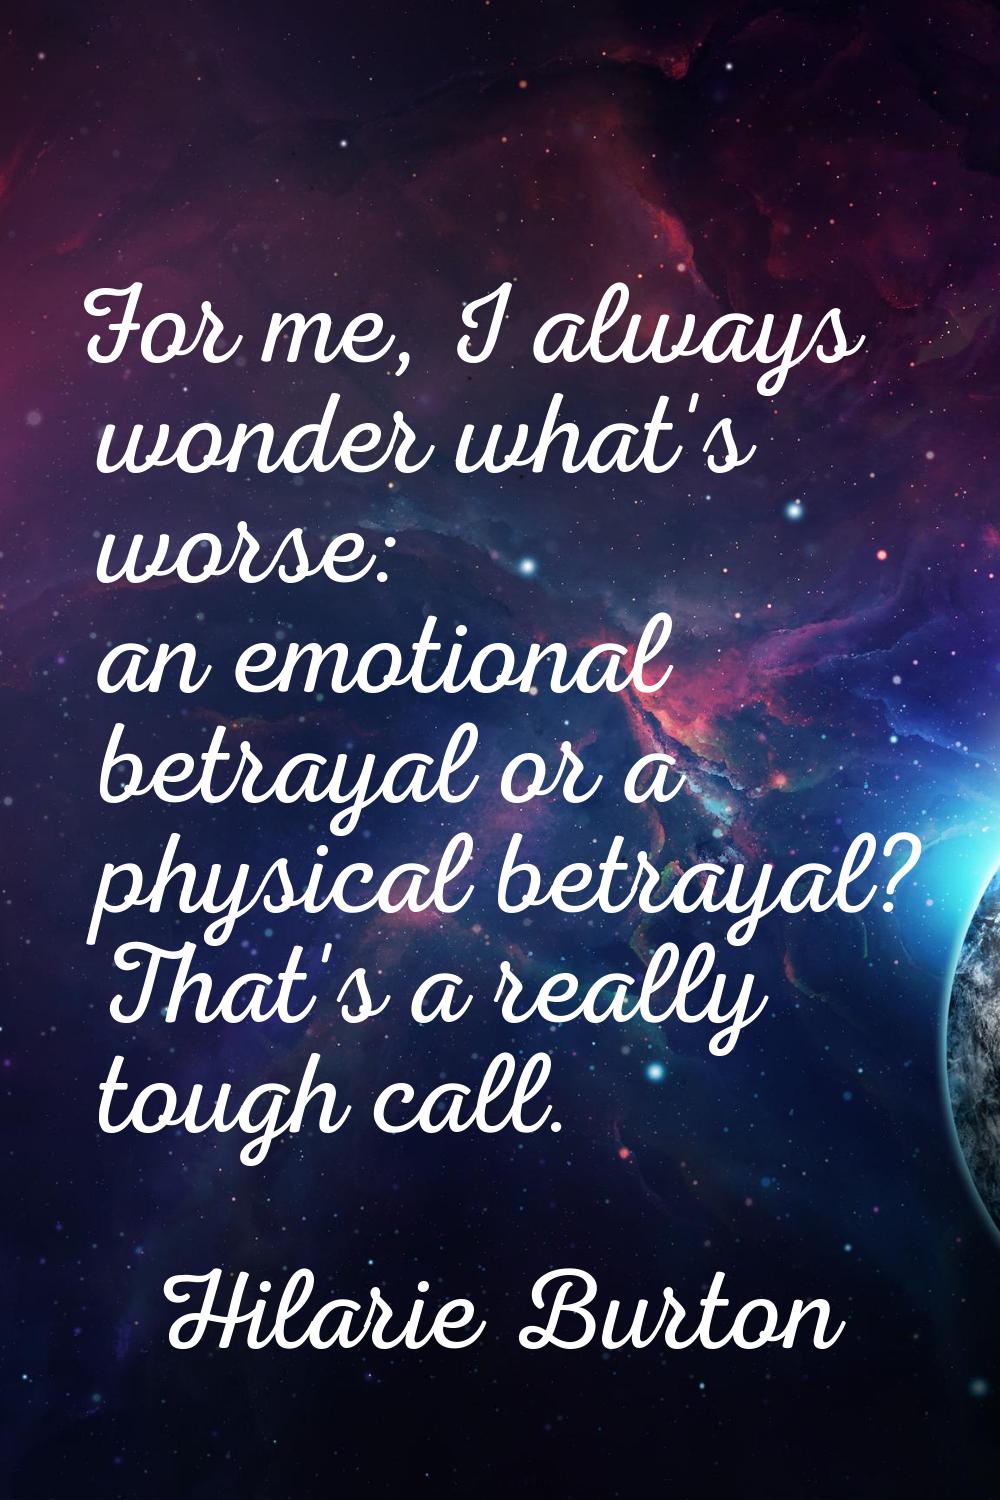 For me, I always wonder what's worse: an emotional betrayal or a physical betrayal? That's a really